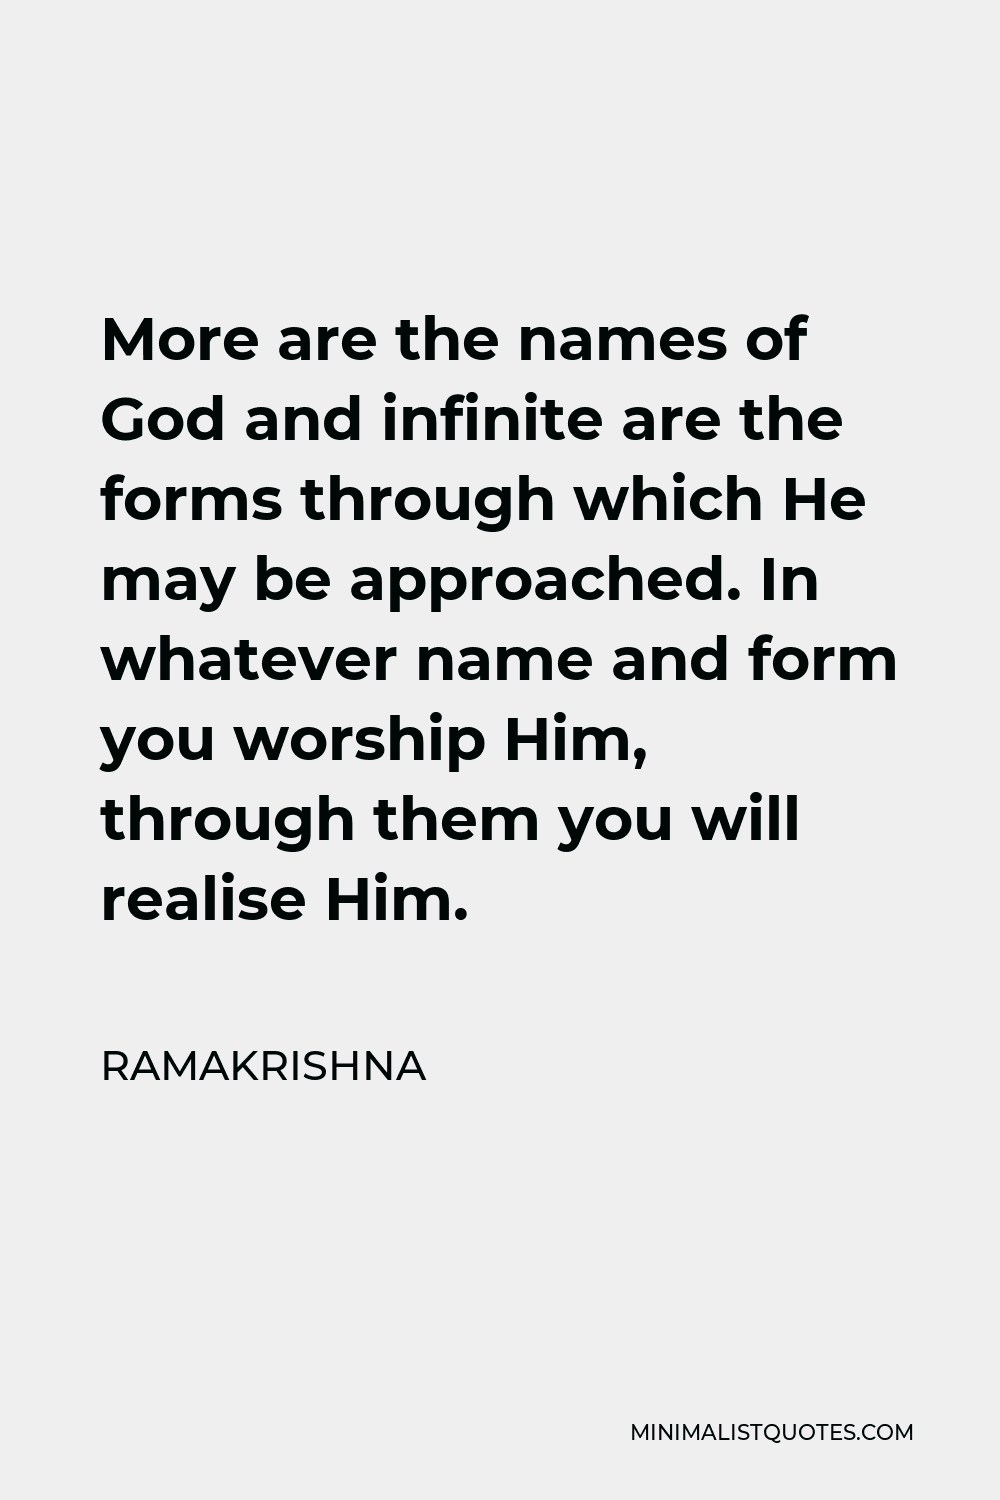 Ramakrishna Quote - More are the names of God and infinite are the forms through which He may be approached. In whatever name and form you worship Him, through them you will realise Him.